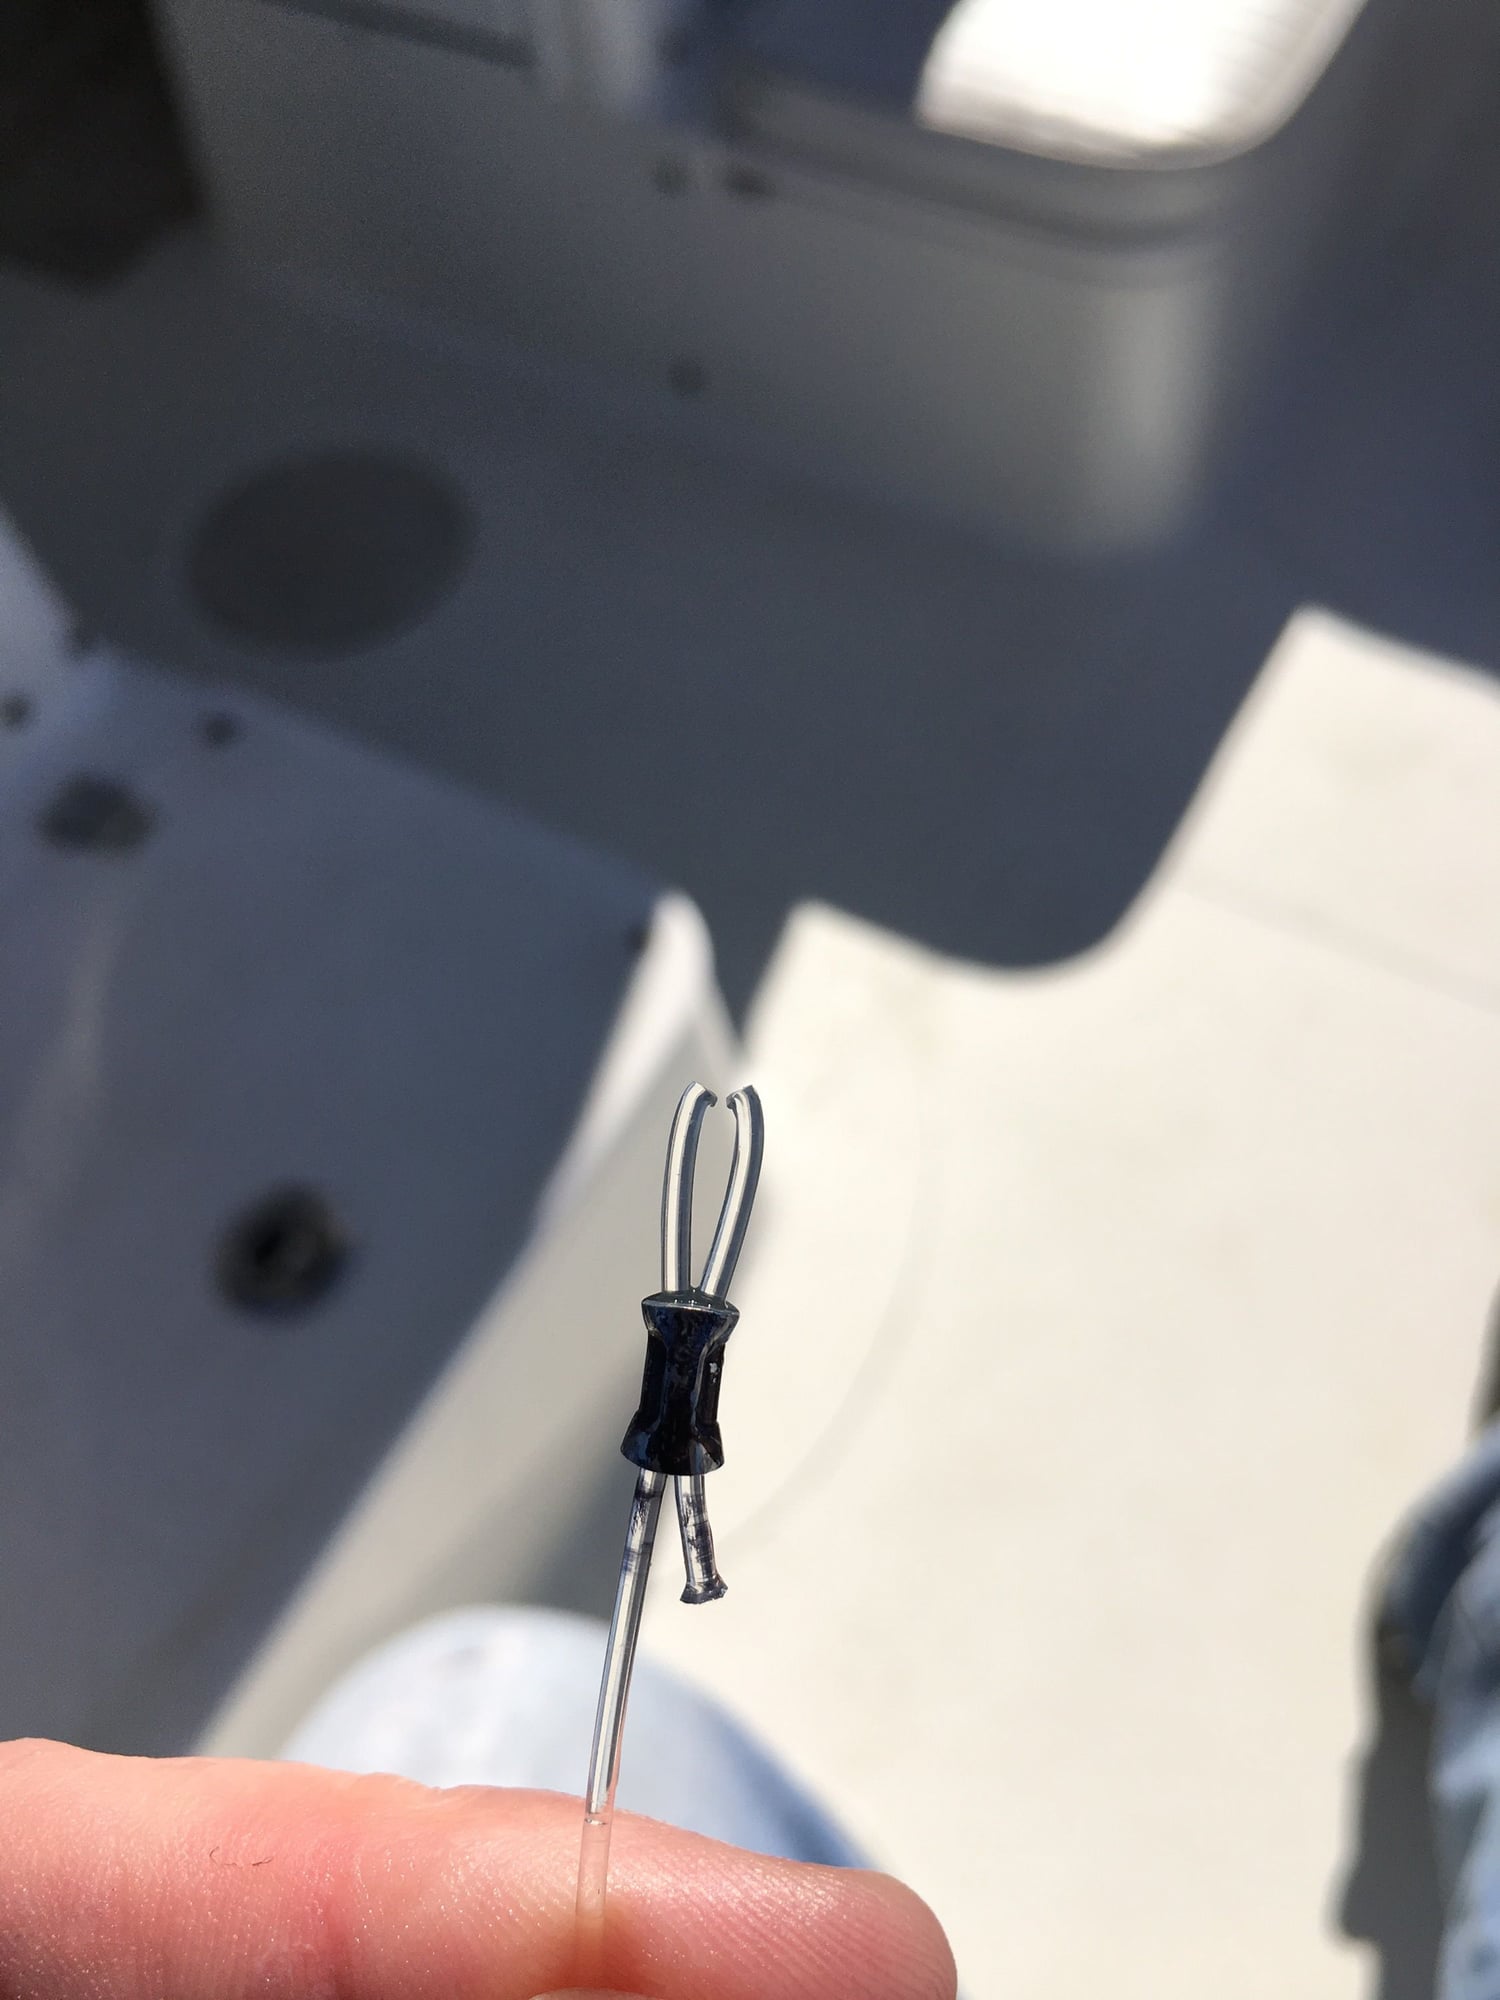 Side mount swivel rod holders? - Page 2 - The Hull Truth - Boating